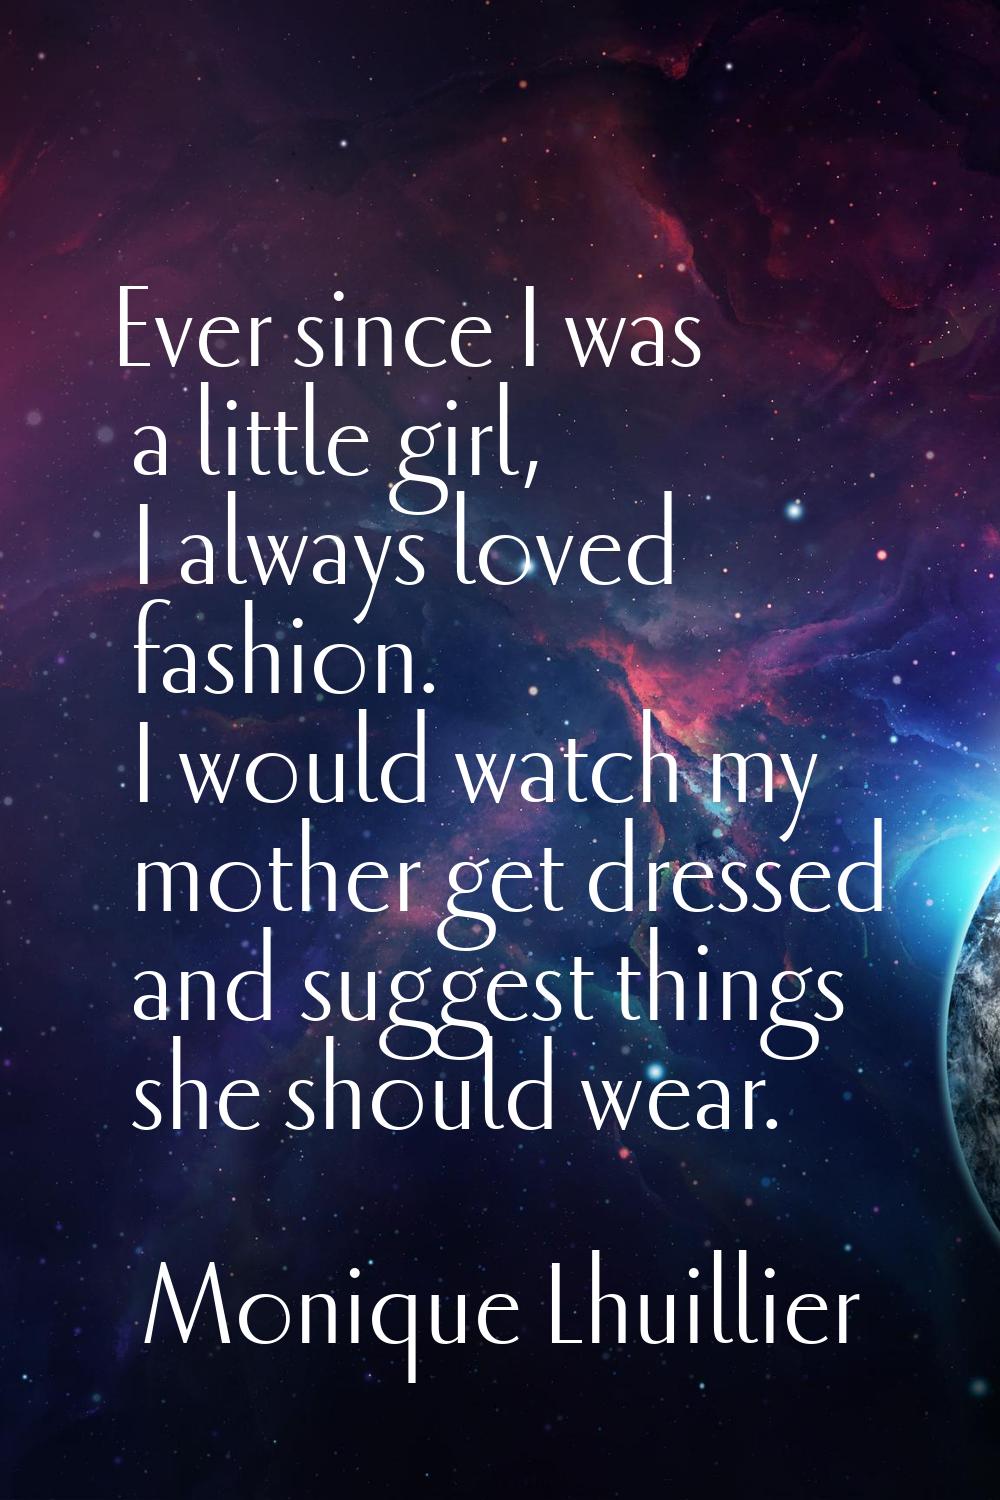 Ever since I was a little girl, I always loved fashion. I would watch my mother get dressed and sug